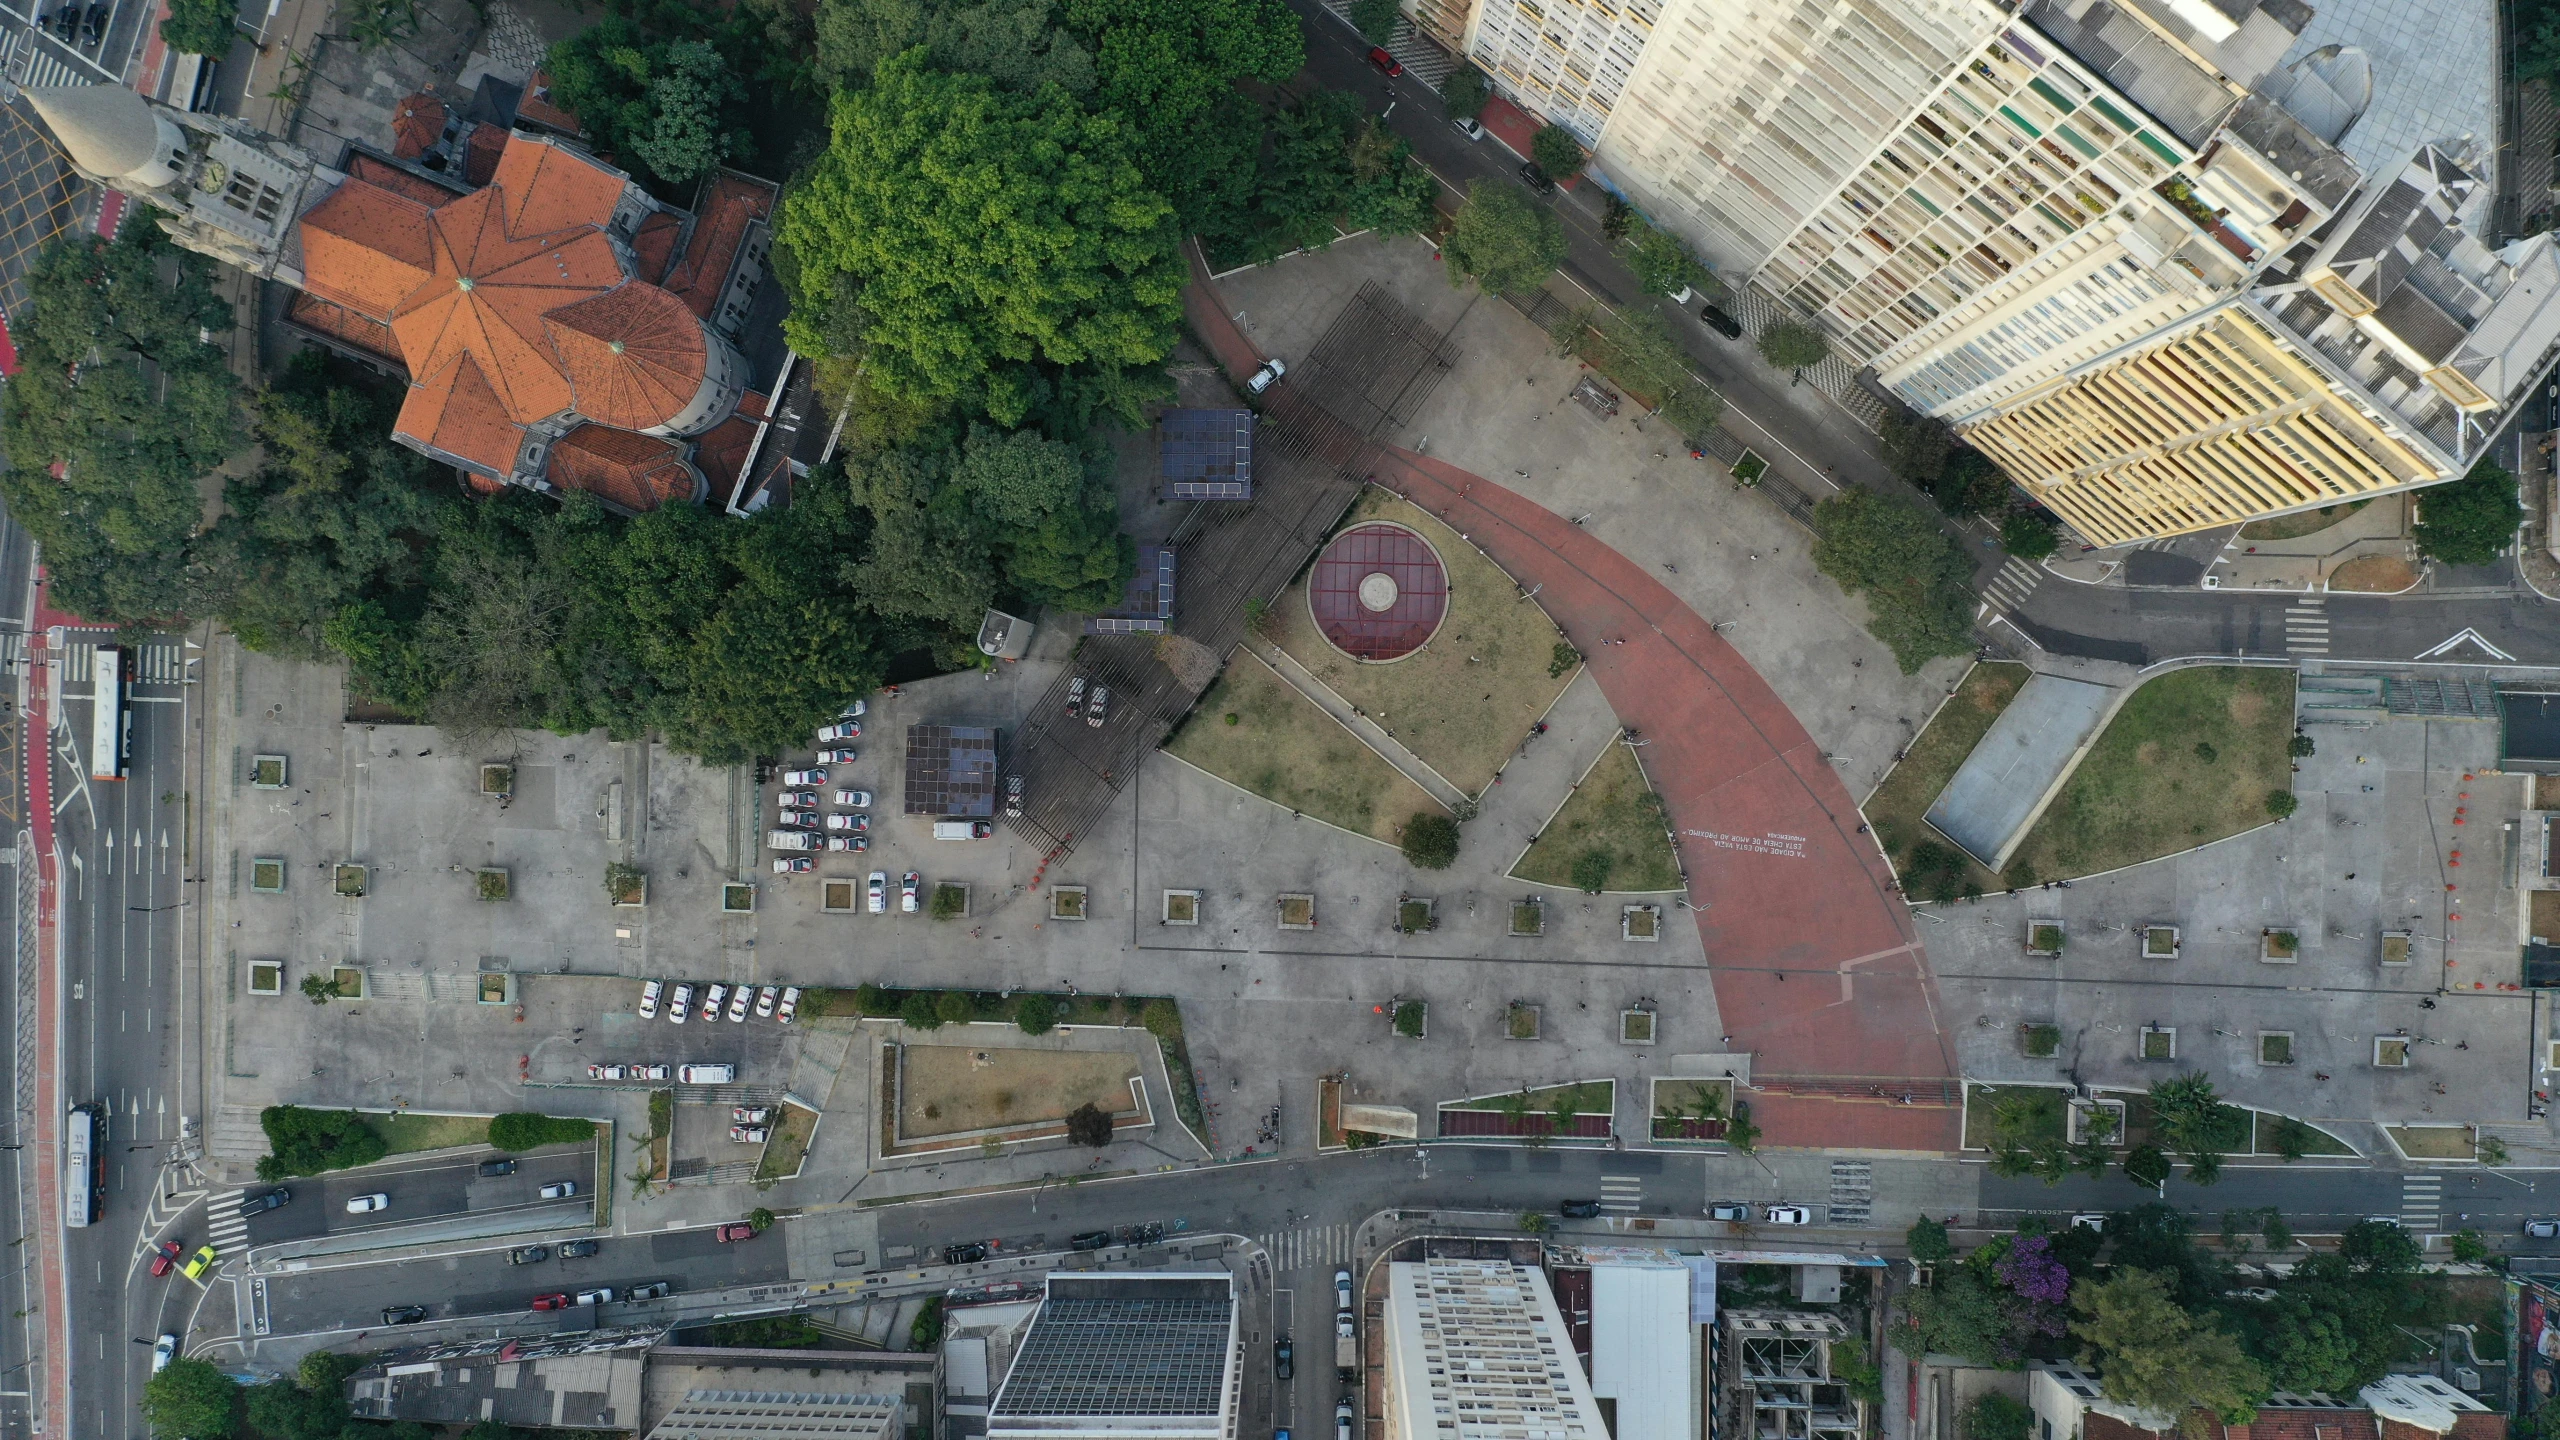 an aerial view of a city with lots of buildings, by Alejandro Obregón, unsplash contest winner, realism, sunken square, são paulo, in a city park, post - soviet courtyard